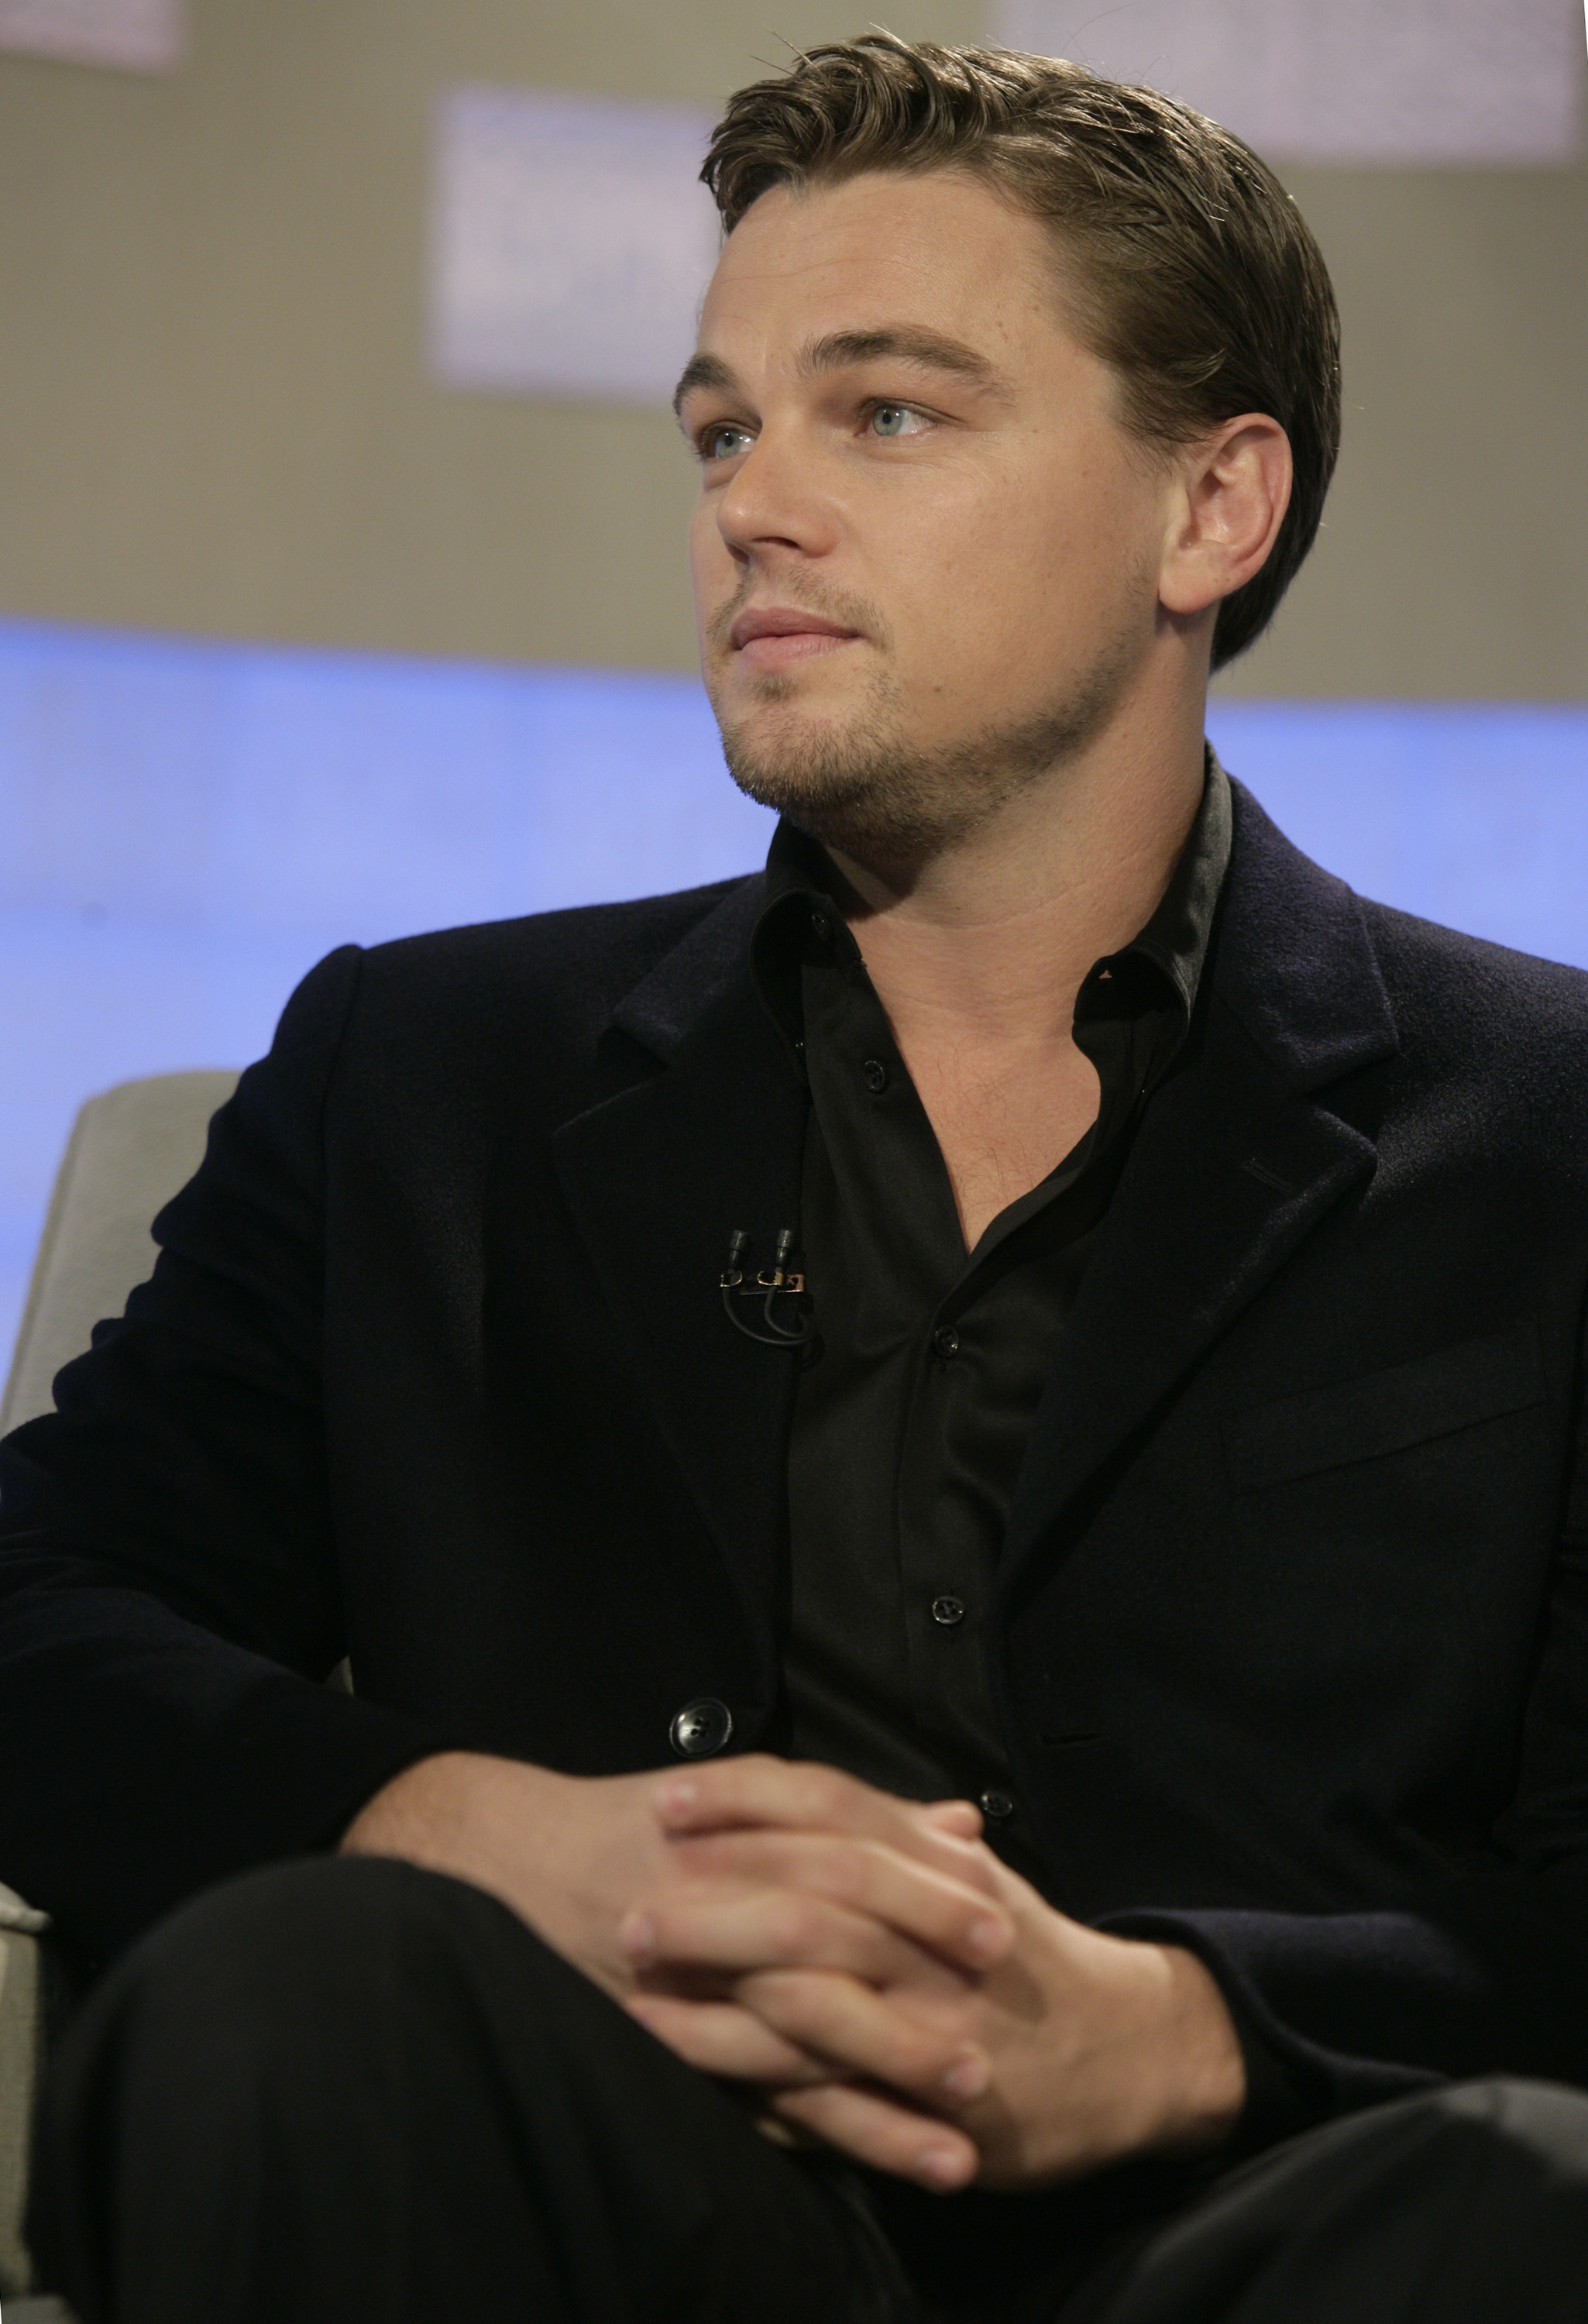 Leonardo DiCaprio during an interview on December 1, 2006 | Source: Getty Images